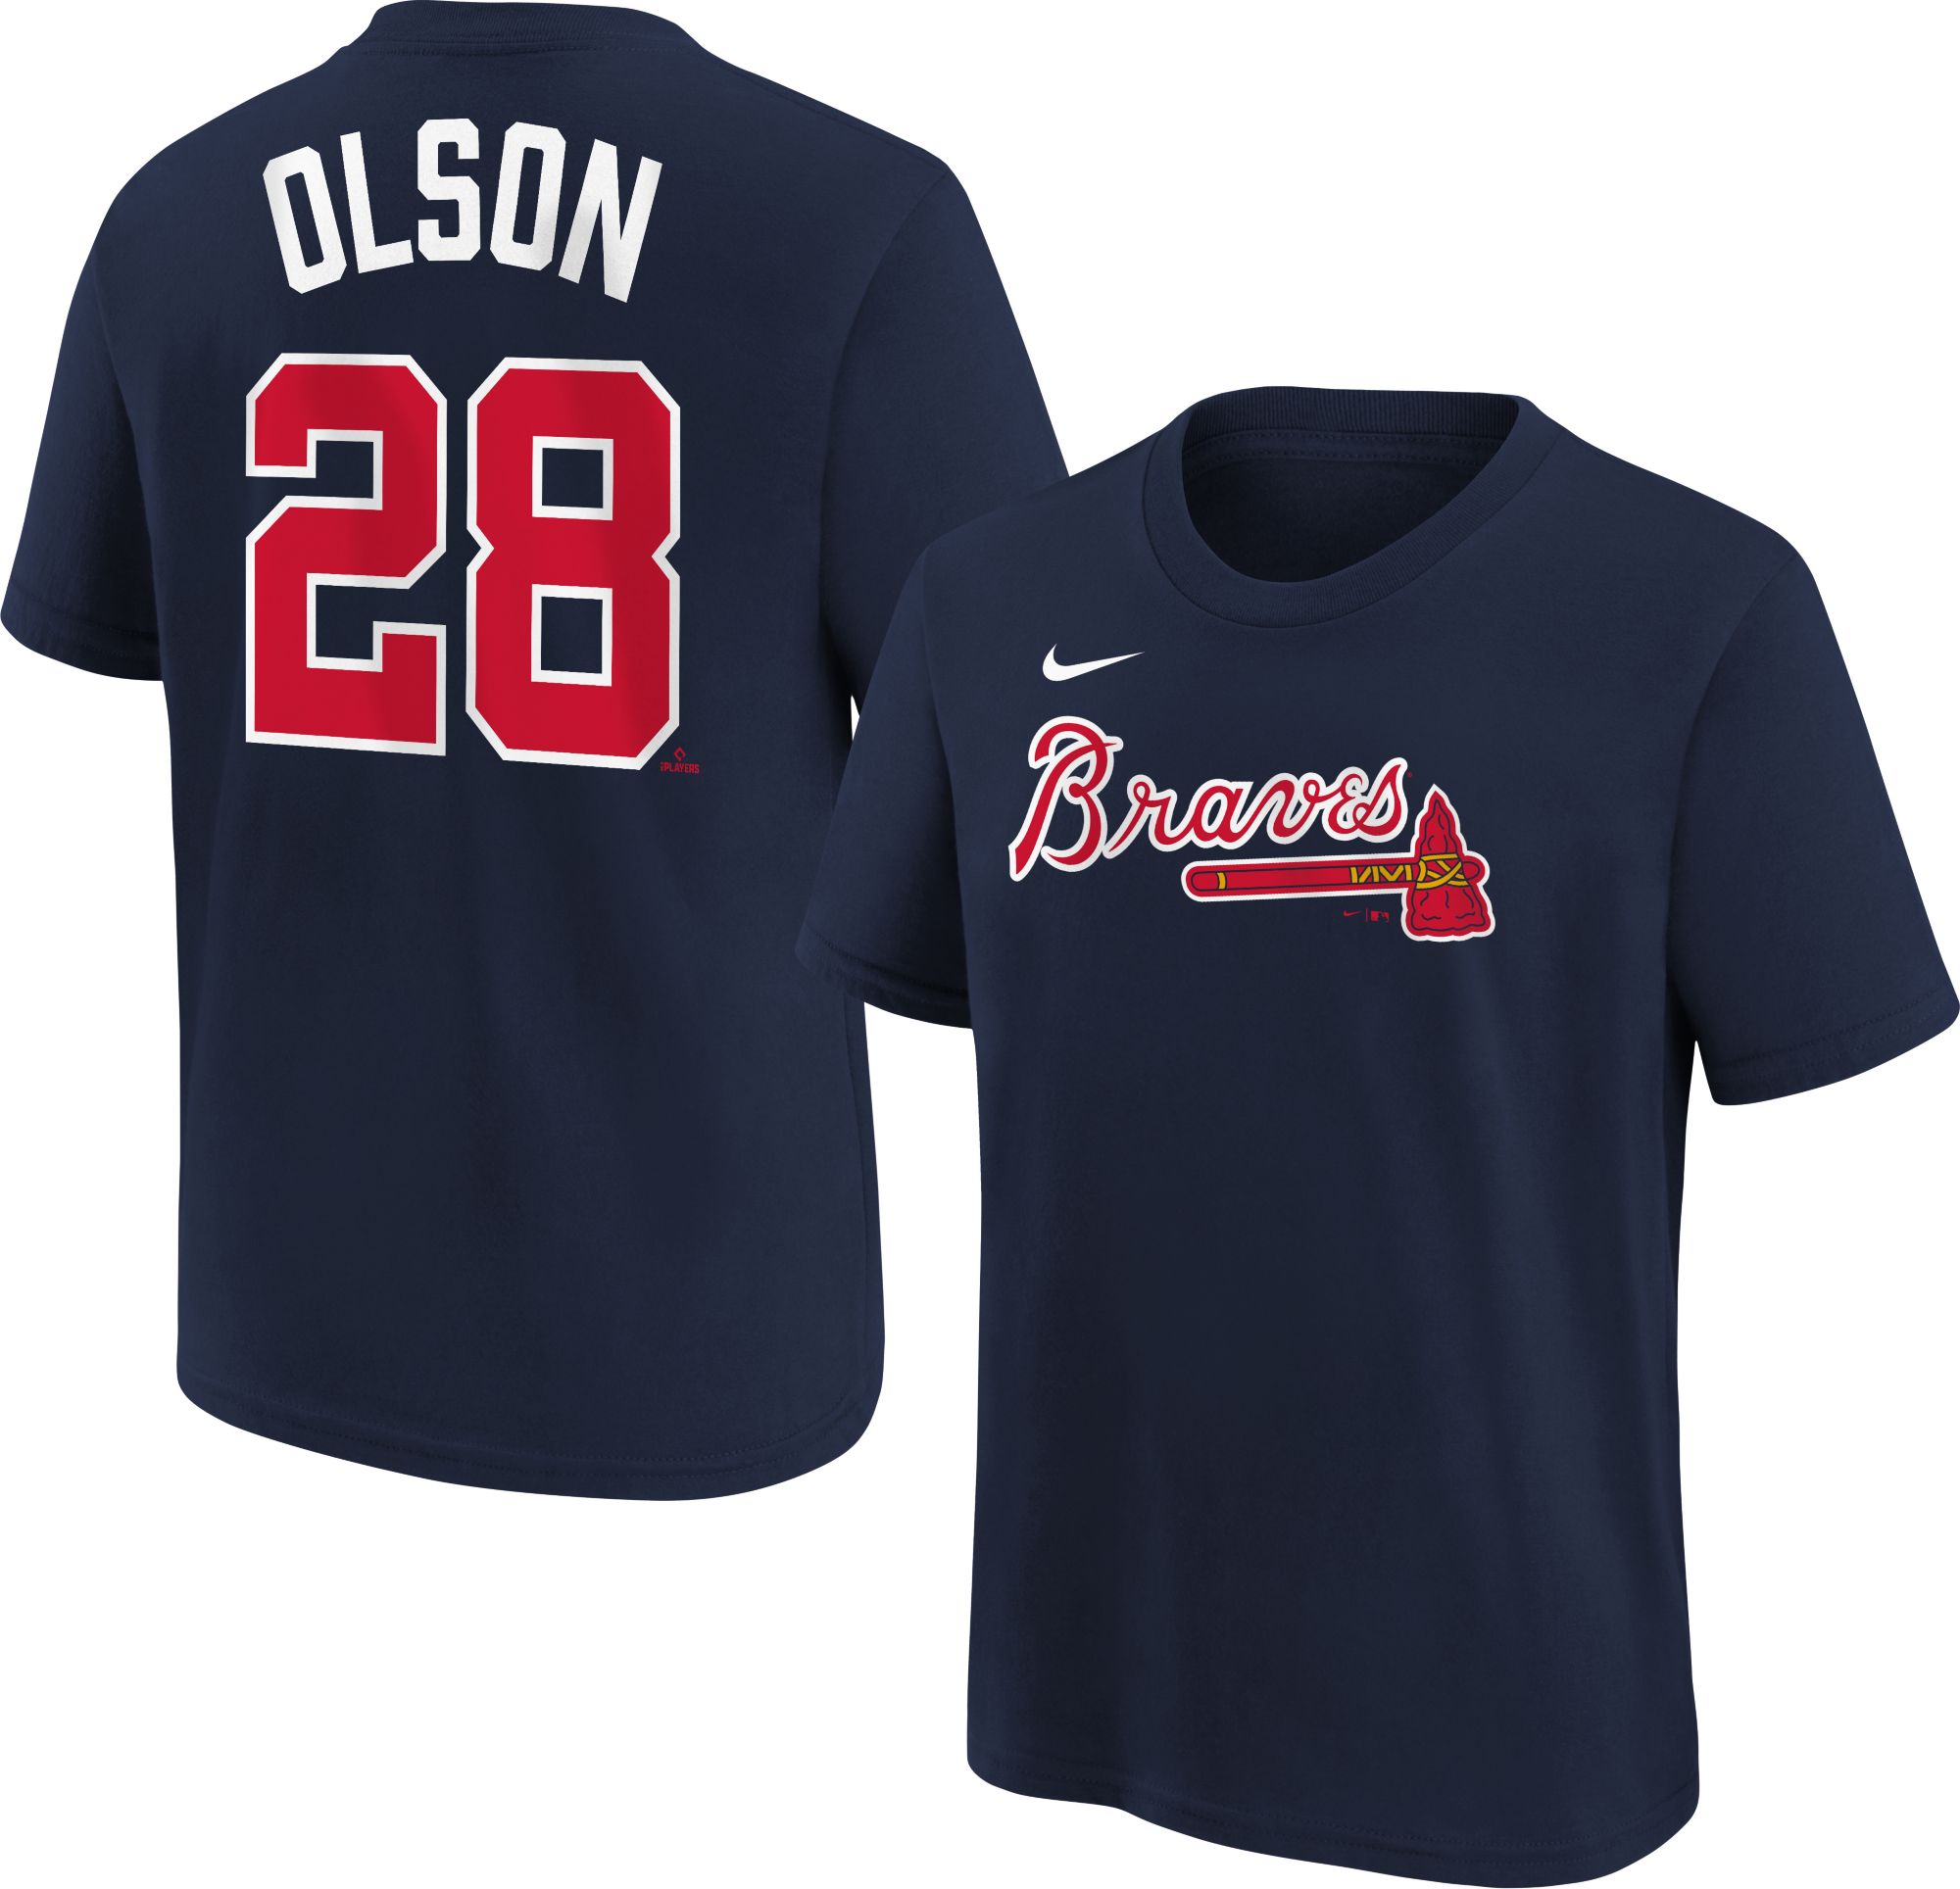 Youth Braves Jerseys and Apparel